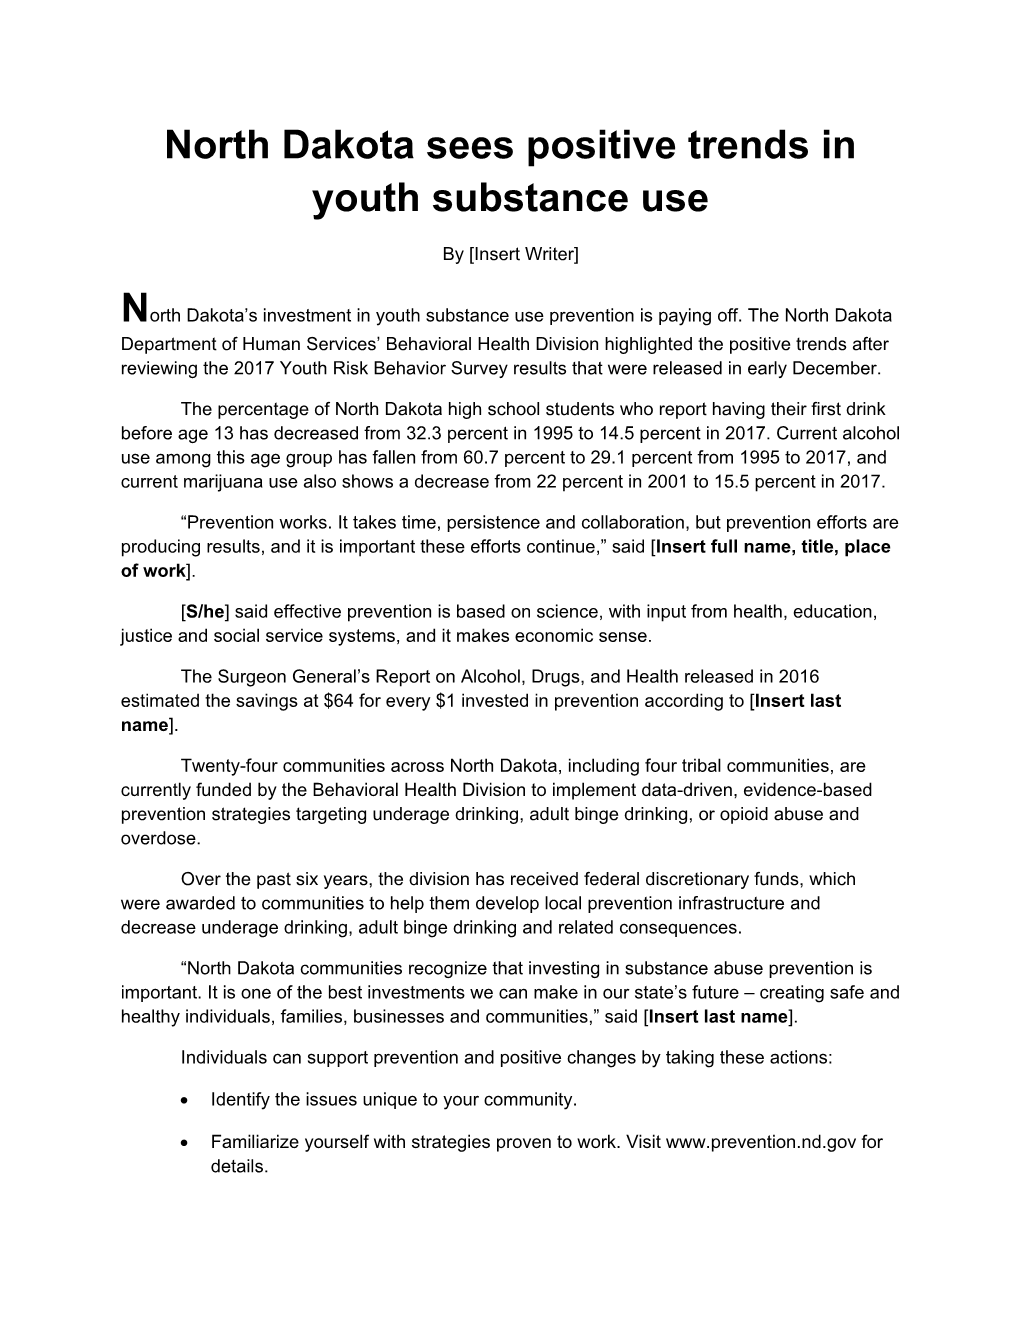 North Dakota Sees Positive Trends in Youth Substance Use